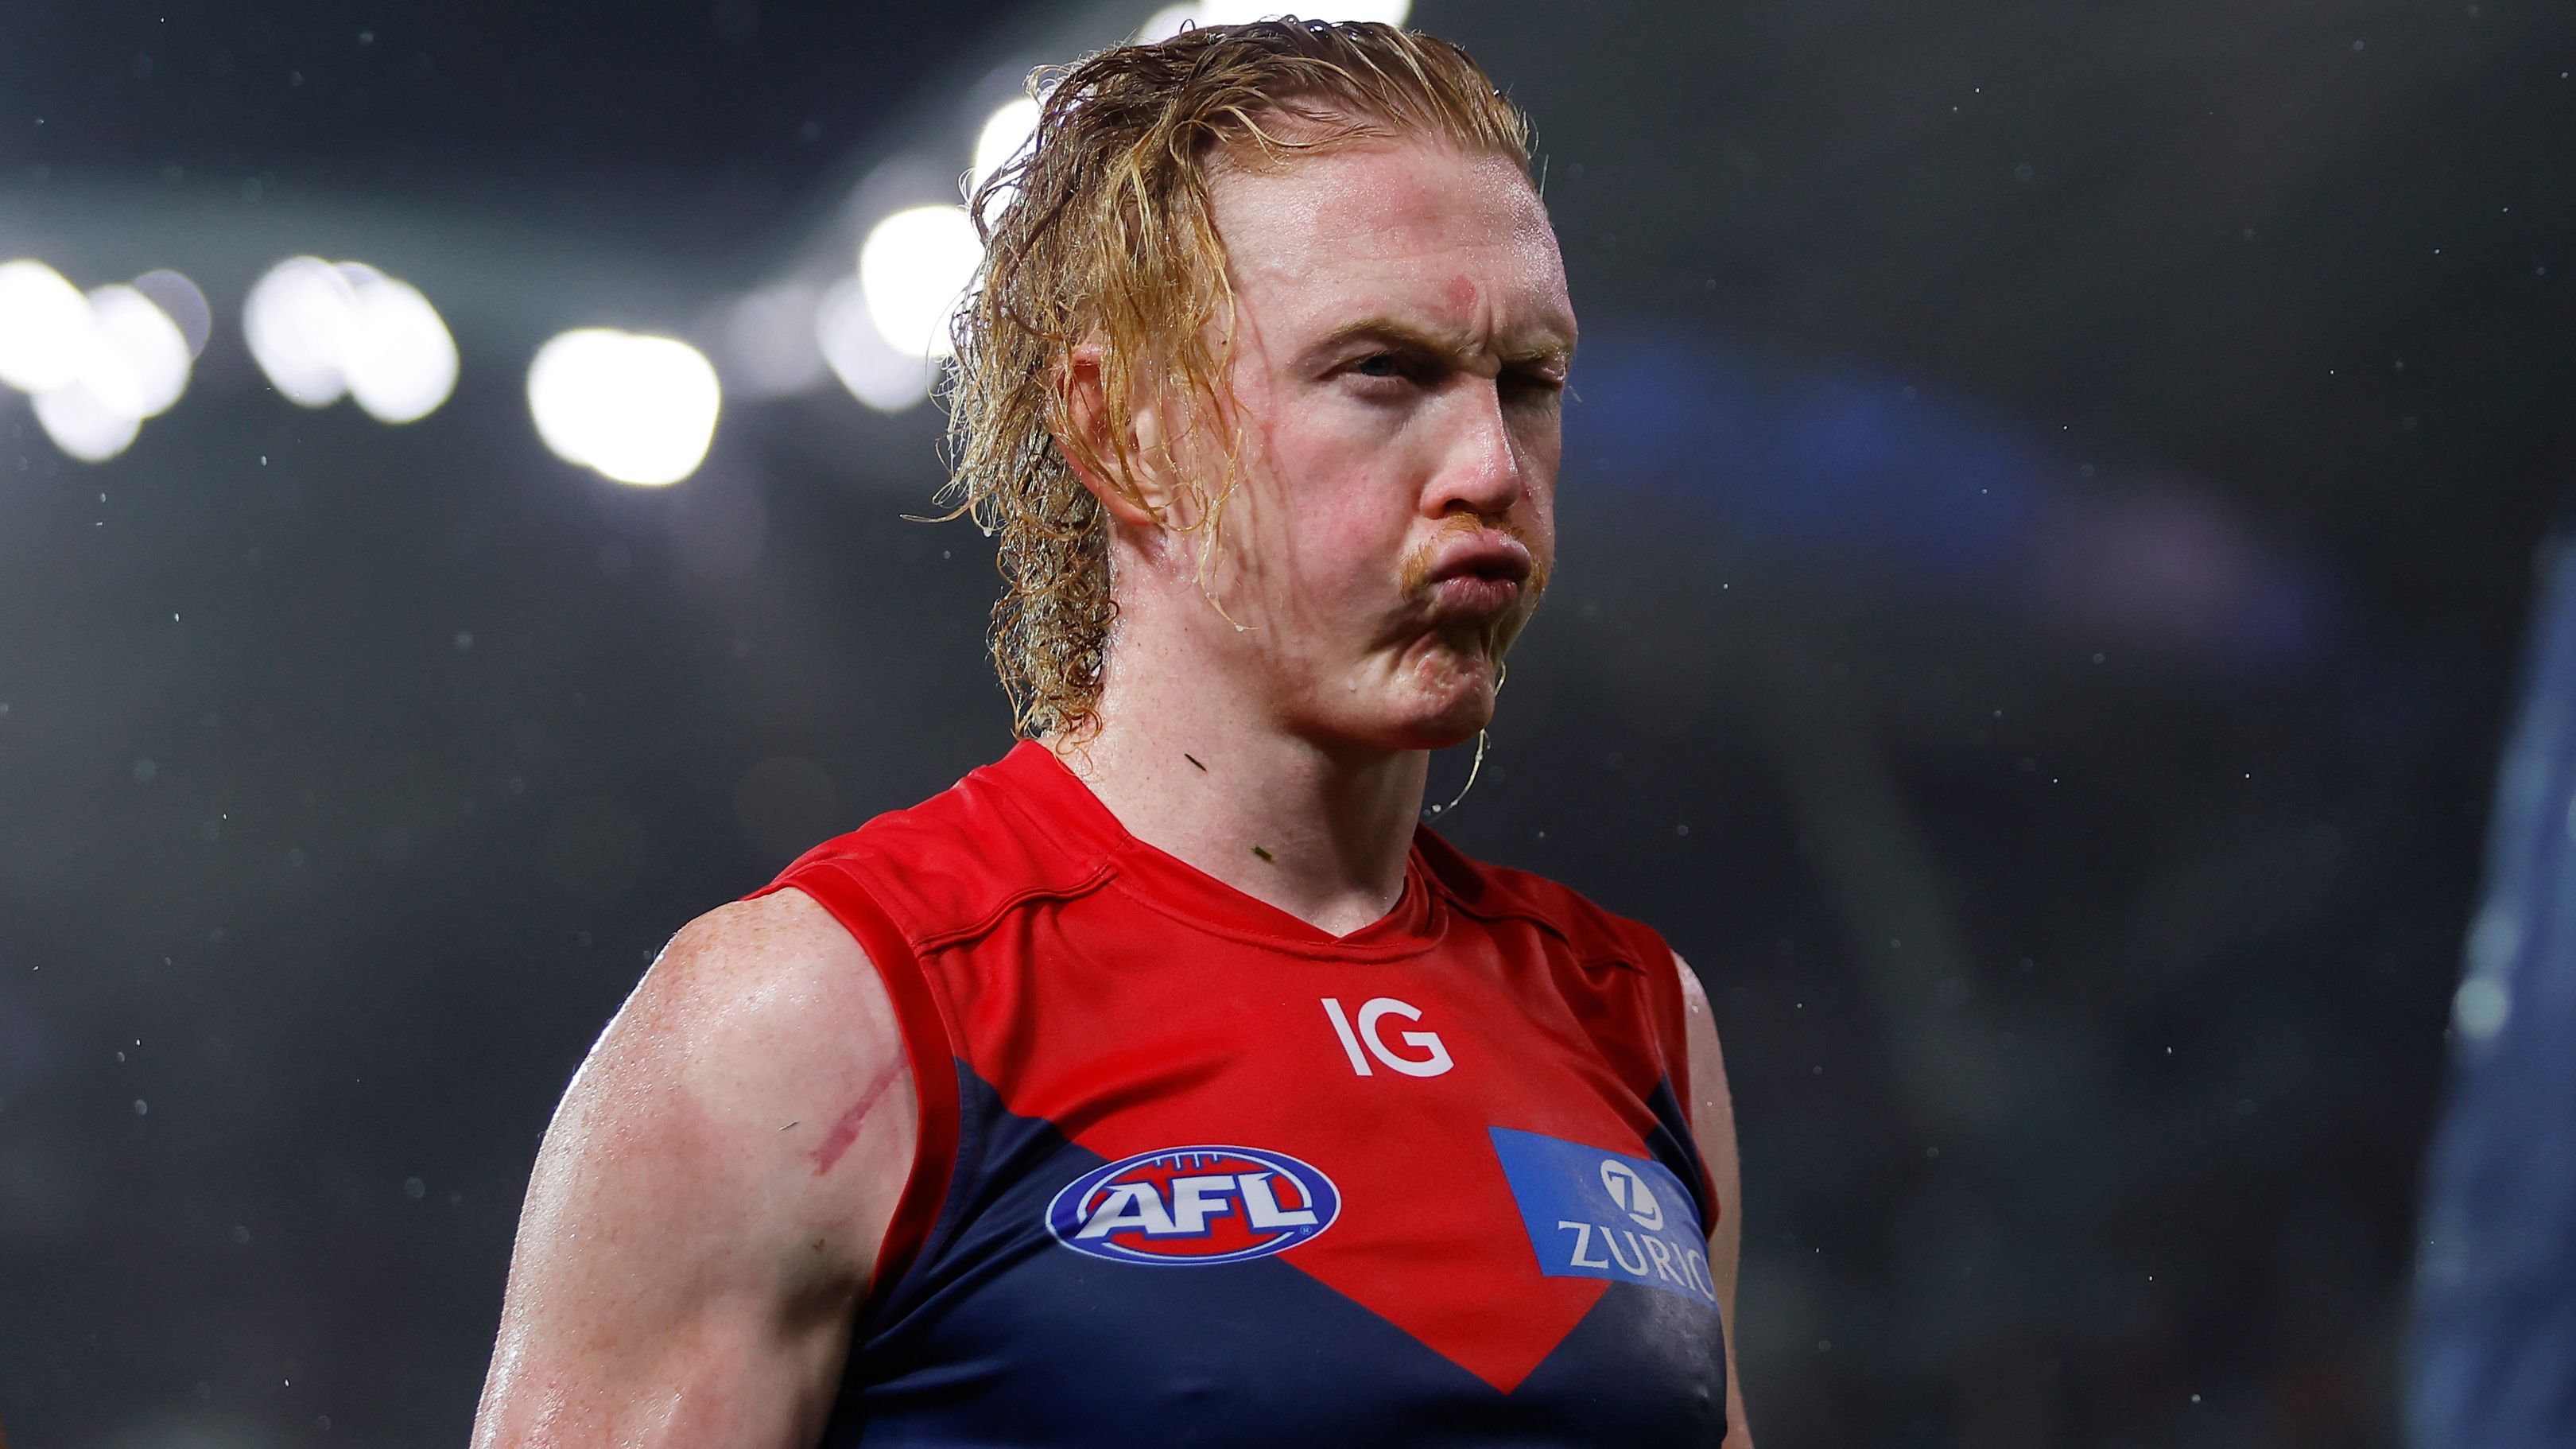 ADELAIDE, AUSTRALIA - APRIL 15: Clayton Oliver of the Demons leaves the field after a loss during the 2023 AFL Round 05 match between the Essendon Bombers and the Melbourne Demons at Adelaide Oval on April 15, 2023 in Adelaide, Australia. (Photo by Dylan Burns/AFL Photos)